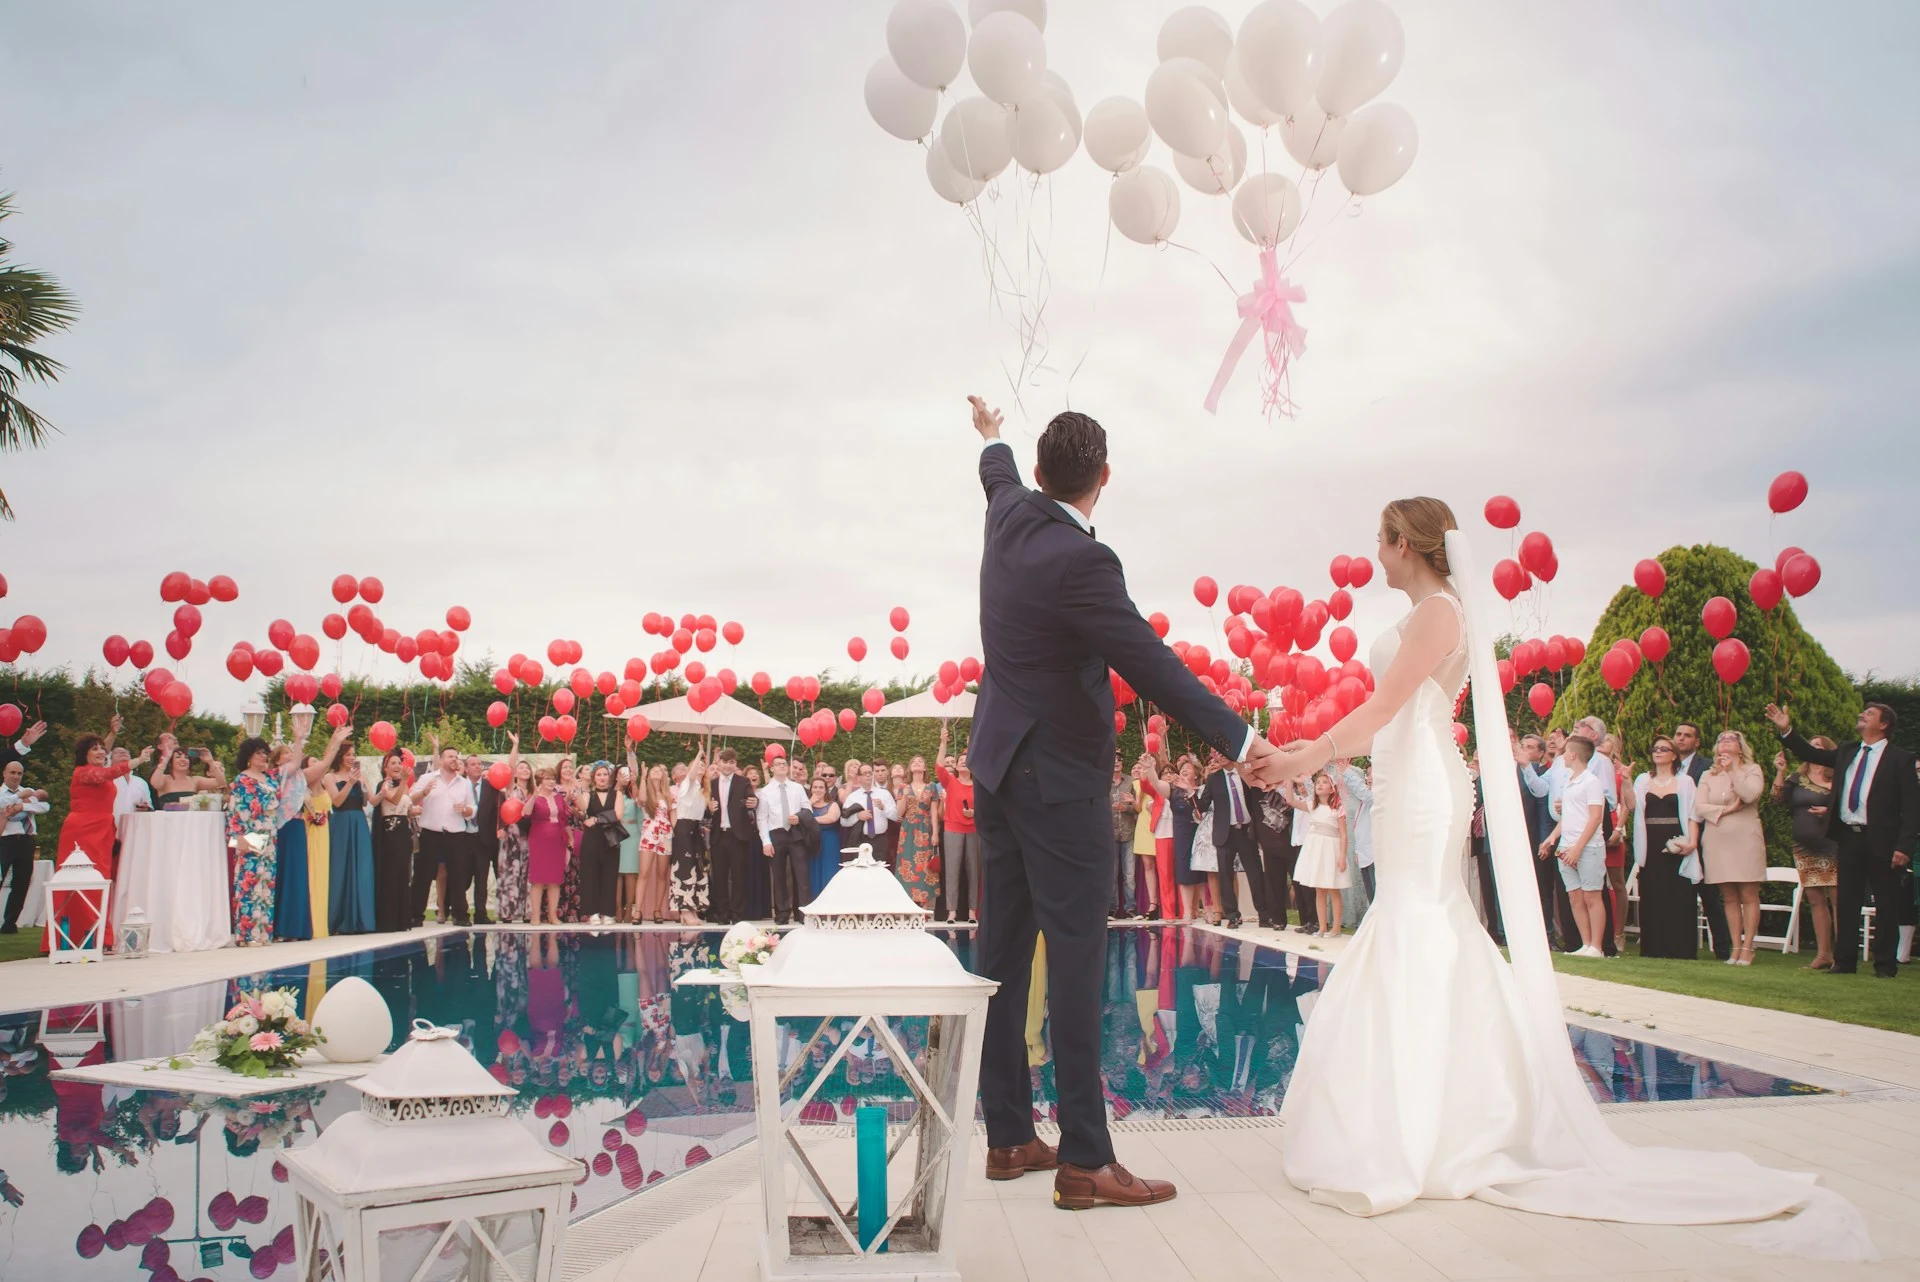 The Wedding of Your Dreams Without the Big Bill